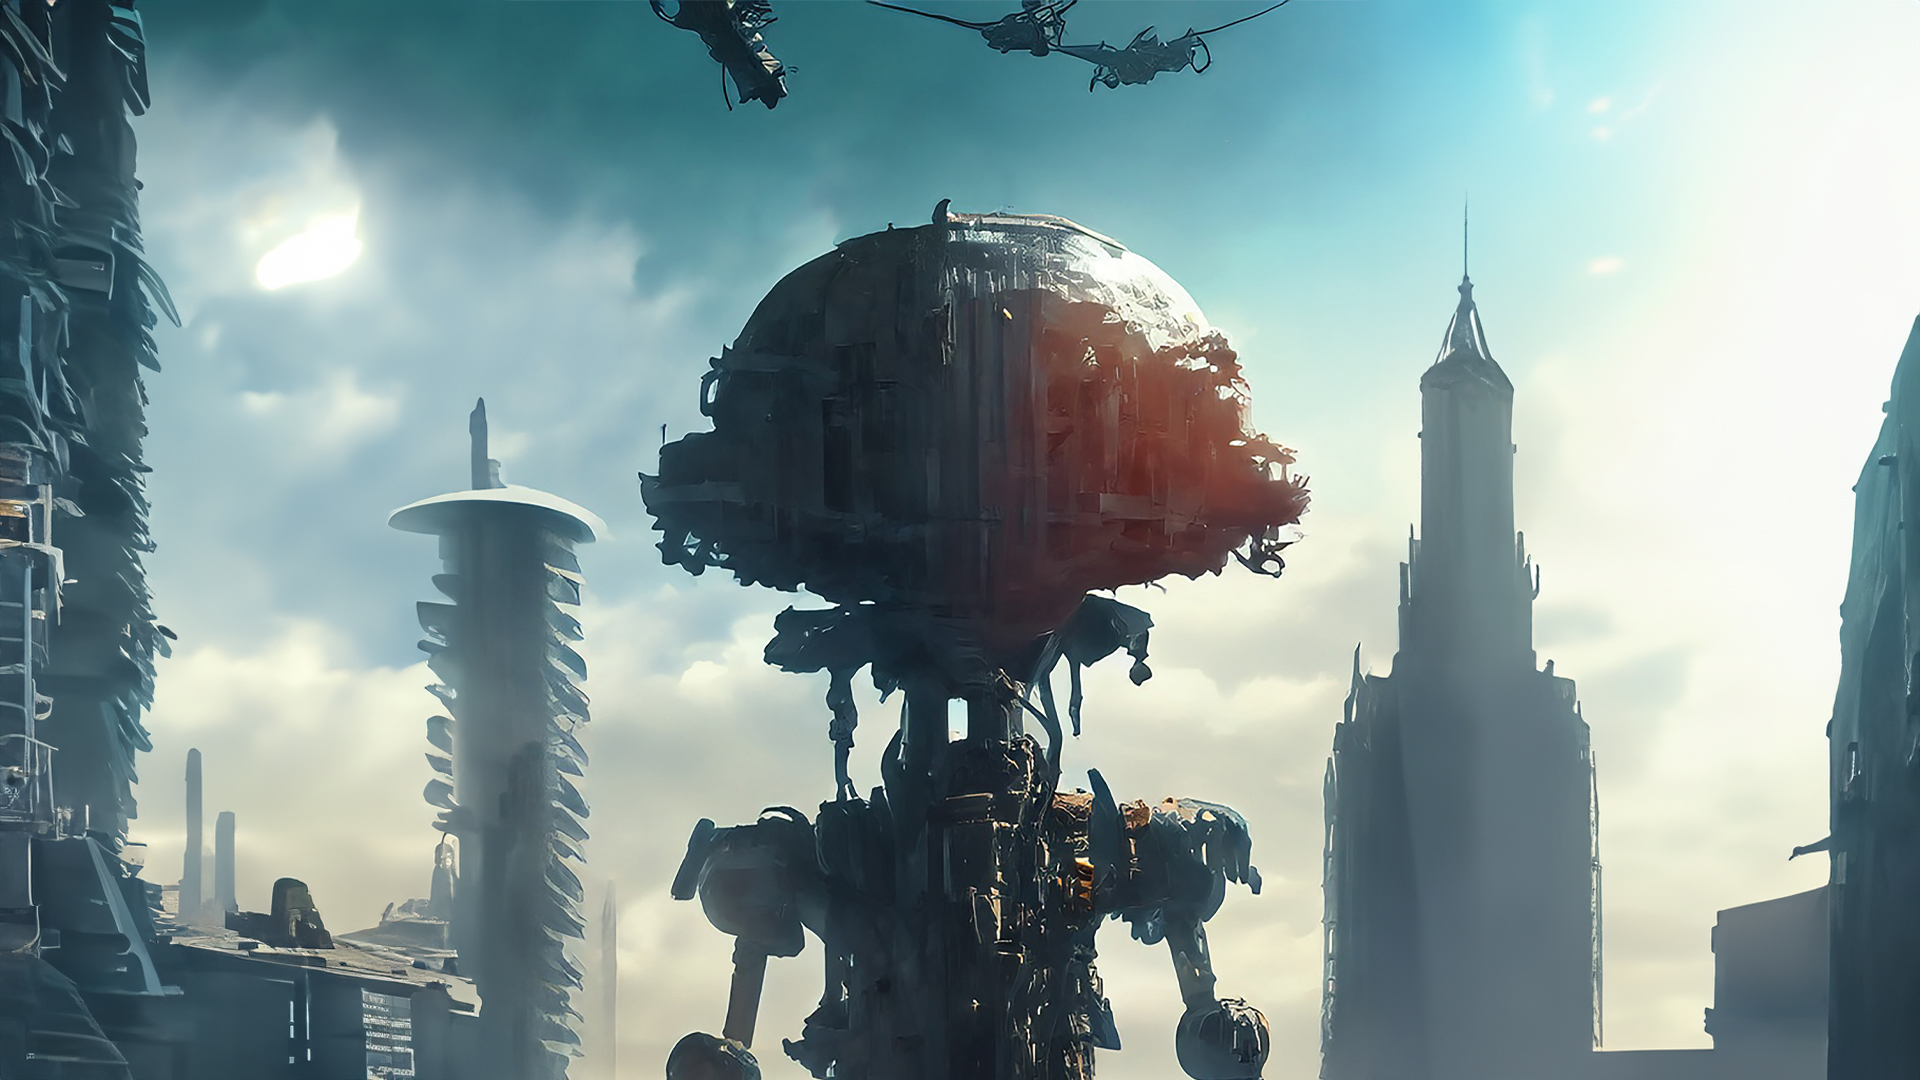 A survival guide for human B2B marketers in a post-AI apocalyptic world